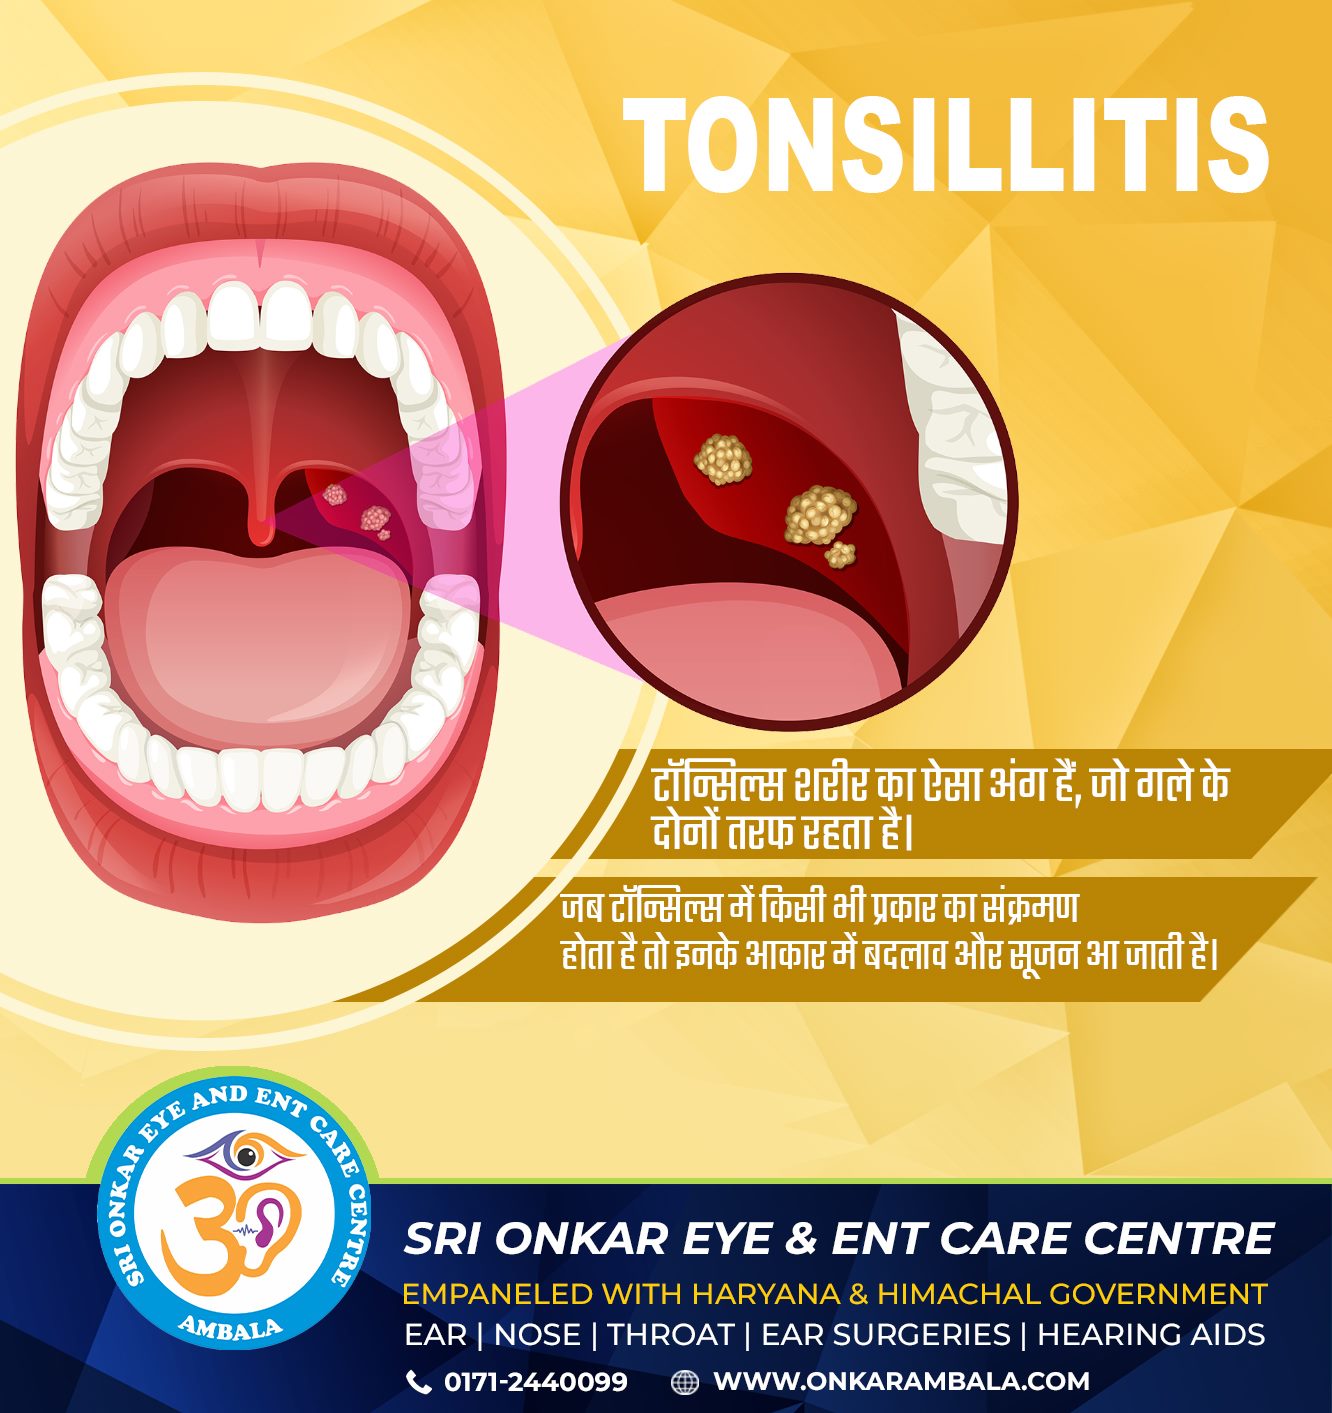 Tonsil Infection Treatment in Ambala | Sri Onkar Eye & ENT Care Centre